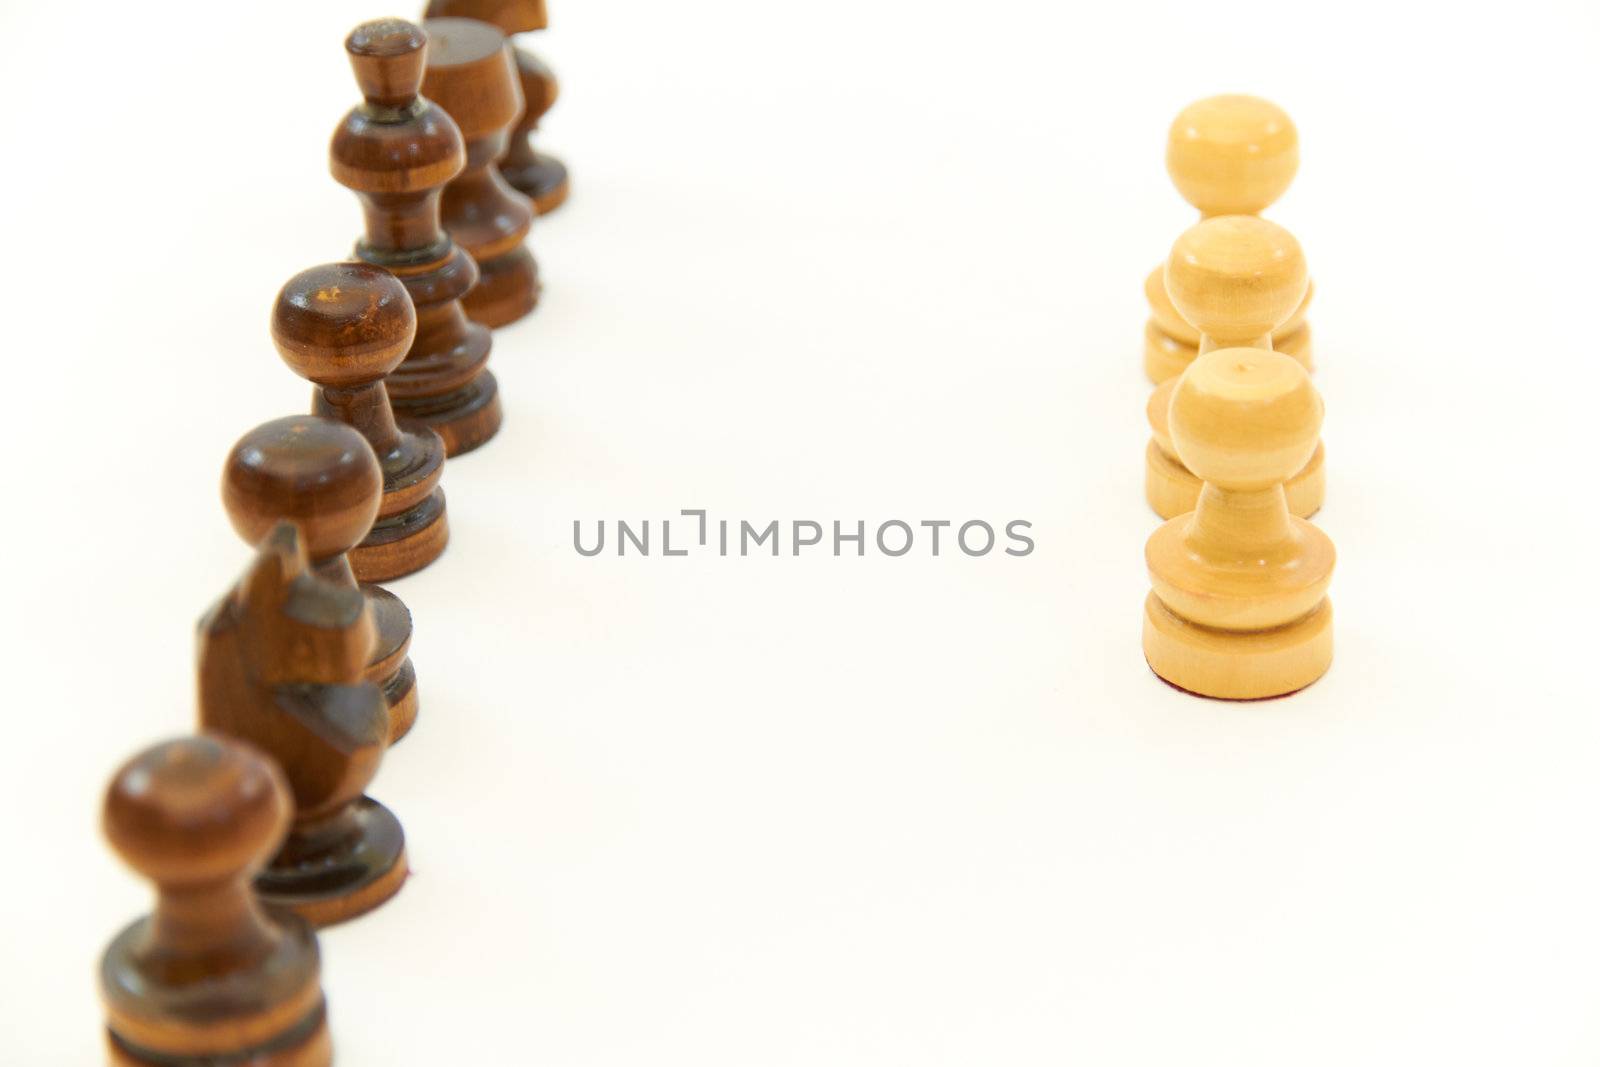 Chess pieces (pawn, knight, king) arranged in an order on white background